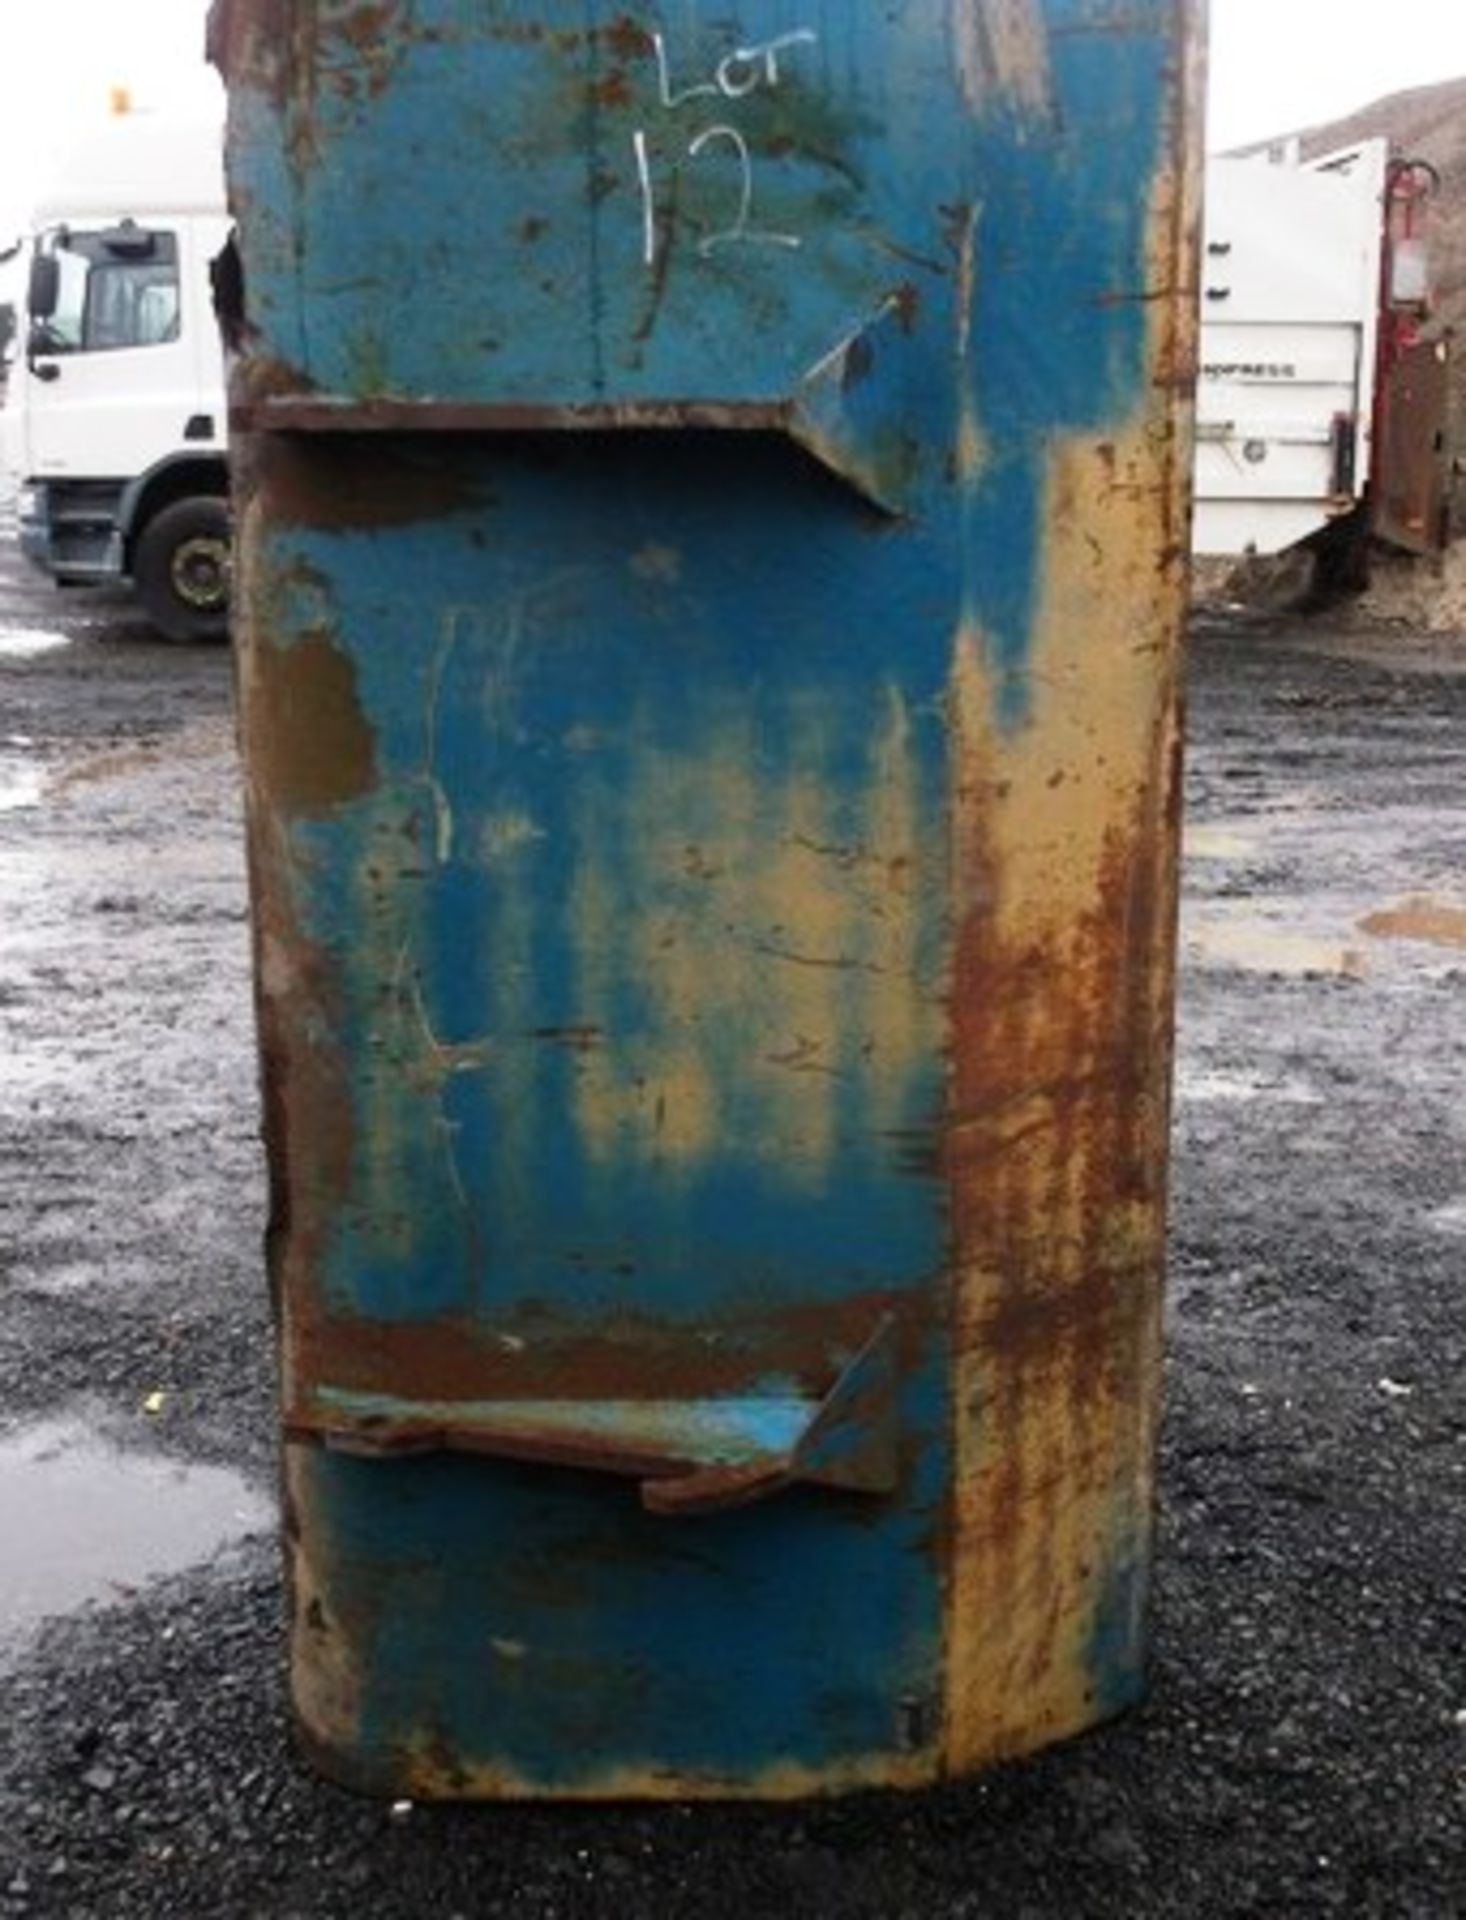 LARGE BUCKET C/W CUTTING EDGE, REQUIRES BOTTOM OF BUCKET PLATED, BLUE - Image 2 of 2